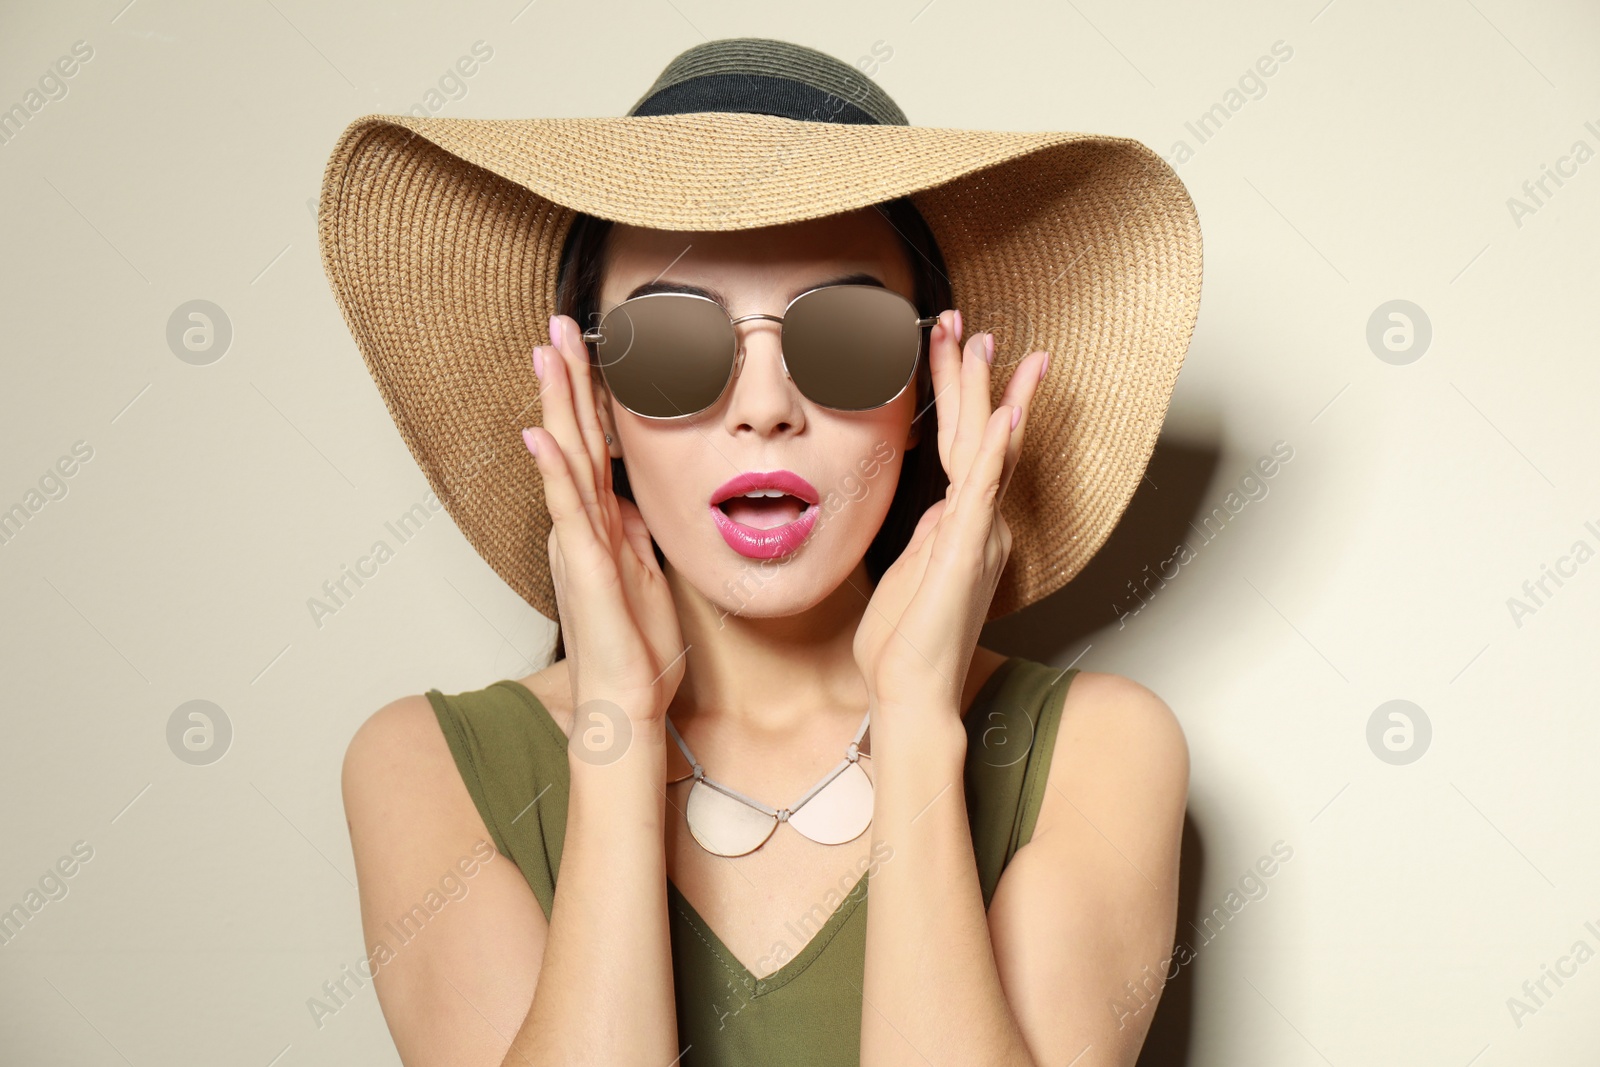 Photo of Emotional woman in stylish sunglasses and hat on beige background